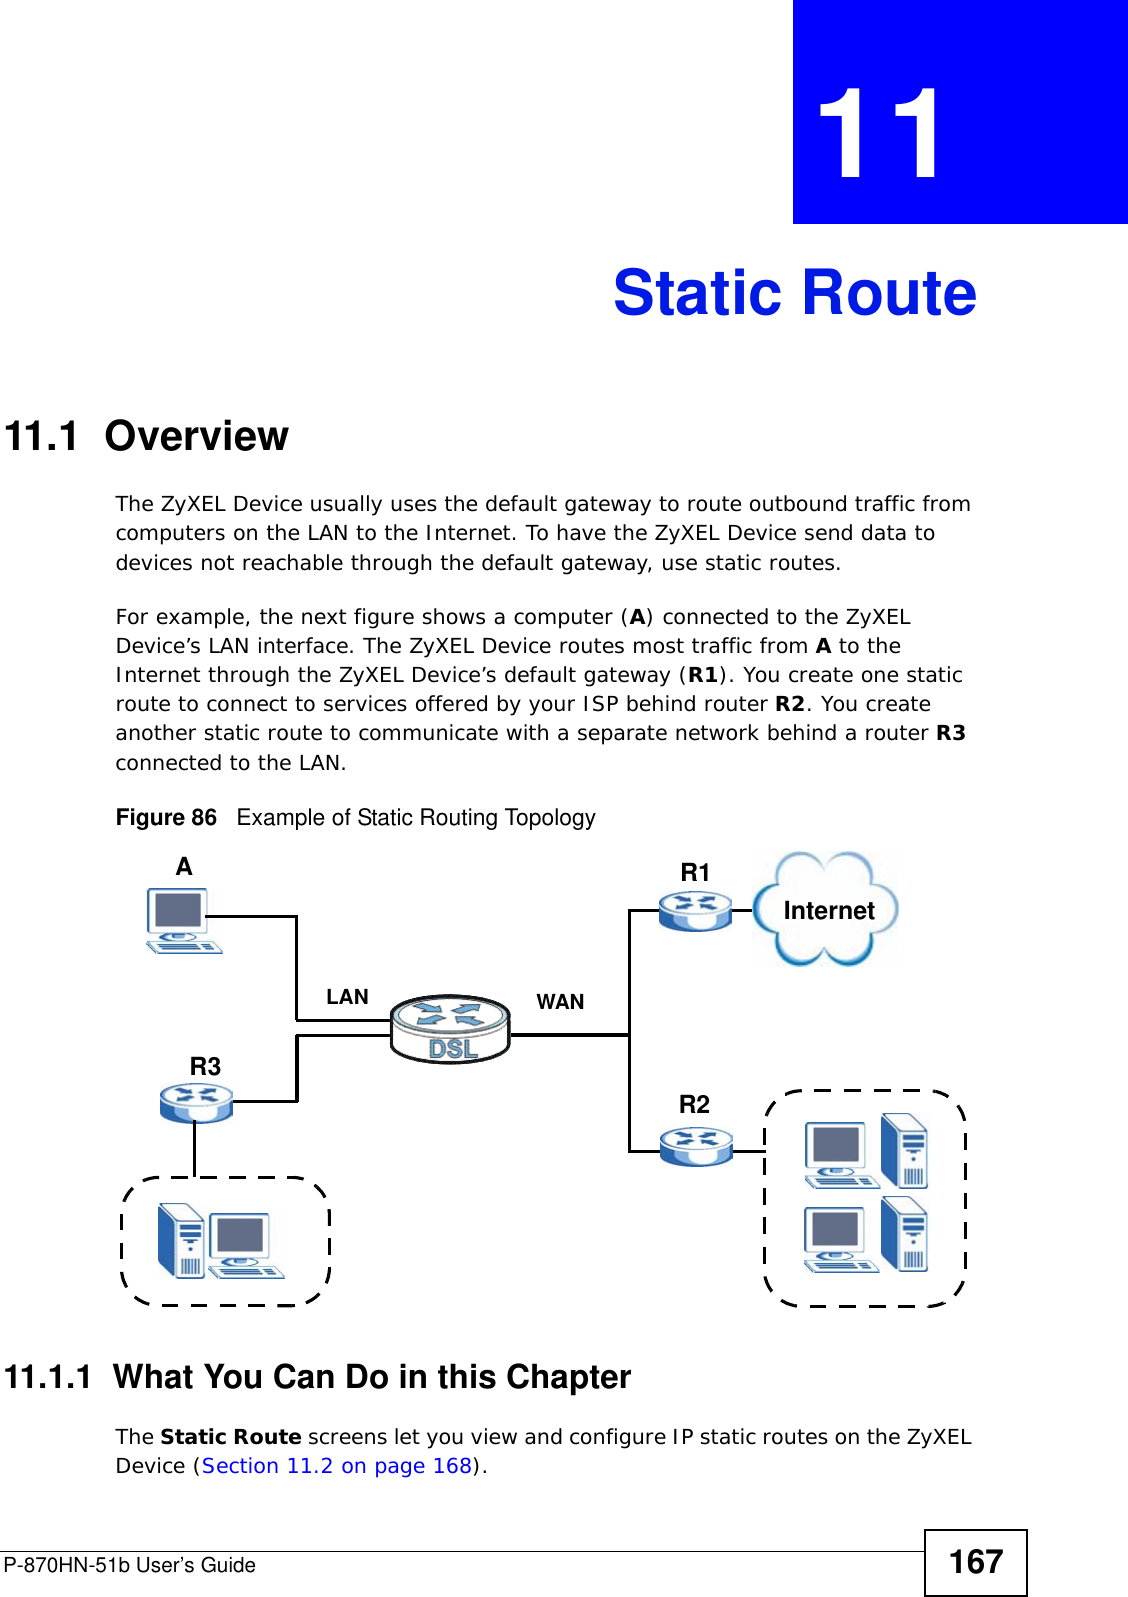 P-870HN-51b User’s Guide 167CHAPTER  11 Static Route11.1  Overview   The ZyXEL Device usually uses the default gateway to route outbound traffic from computers on the LAN to the Internet. To have the ZyXEL Device send data to devices not reachable through the default gateway, use static routes.For example, the next figure shows a computer (A) connected to the ZyXEL Device’s LAN interface. The ZyXEL Device routes most traffic from A to the Internet through the ZyXEL Device’s default gateway (R1). You create one static route to connect to services offered by your ISP behind router R2. You create another static route to communicate with a separate network behind a router R3 connected to the LAN.   Figure 86   Example of Static Routing Topology11.1.1  What You Can Do in this ChapterThe Static Route screens let you view and configure IP static routes on the ZyXEL Device (Section 11.2 on page 168).WANR1R2AR3LANInternet